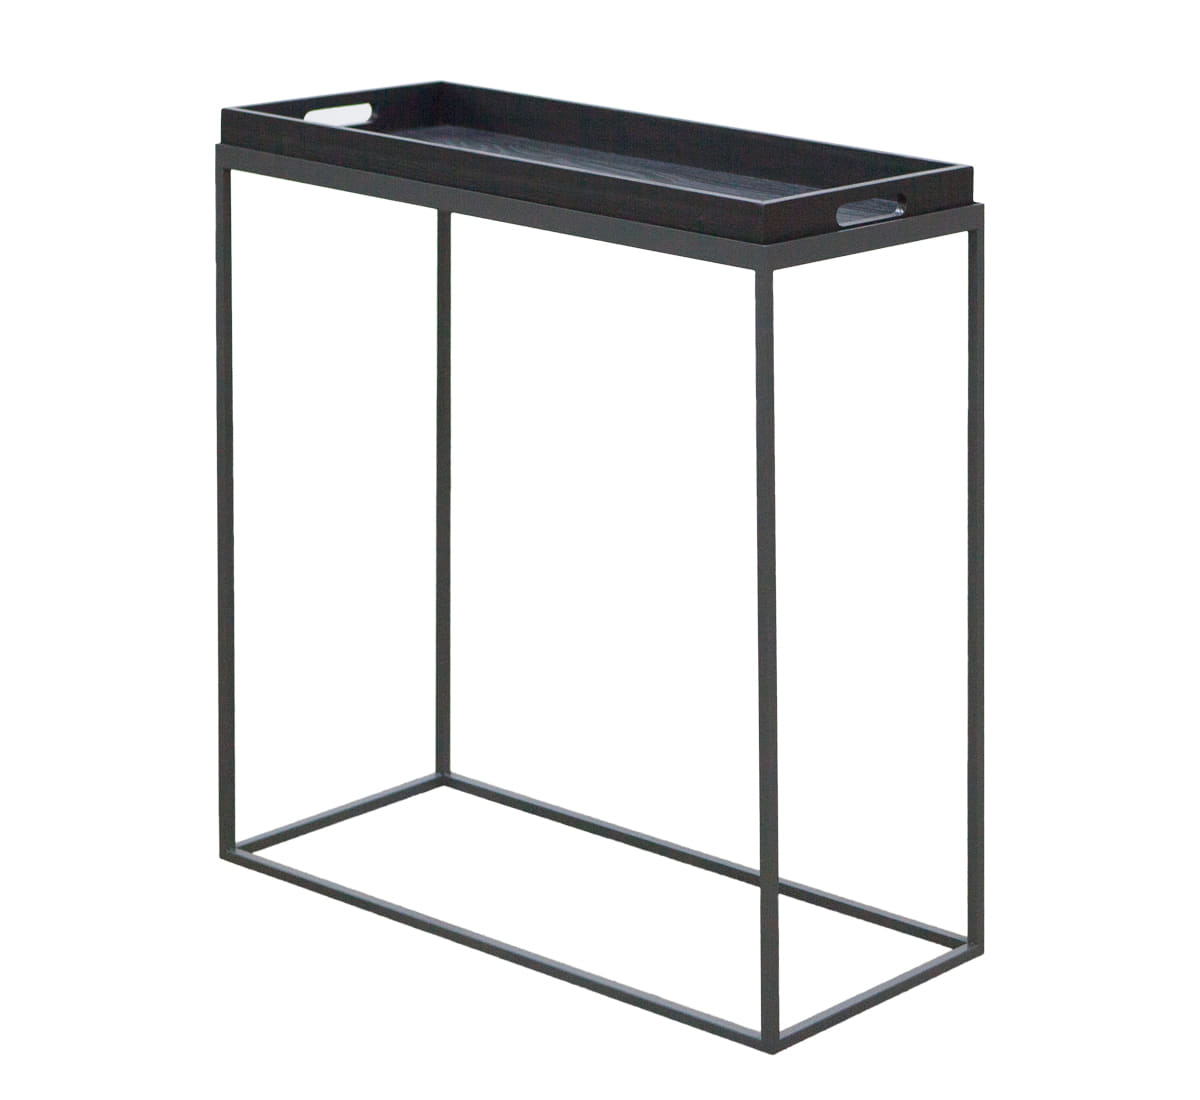 Zacc collection by SEDEC Rectangle Tray Console 직사각 트레이 콘솔 차콜